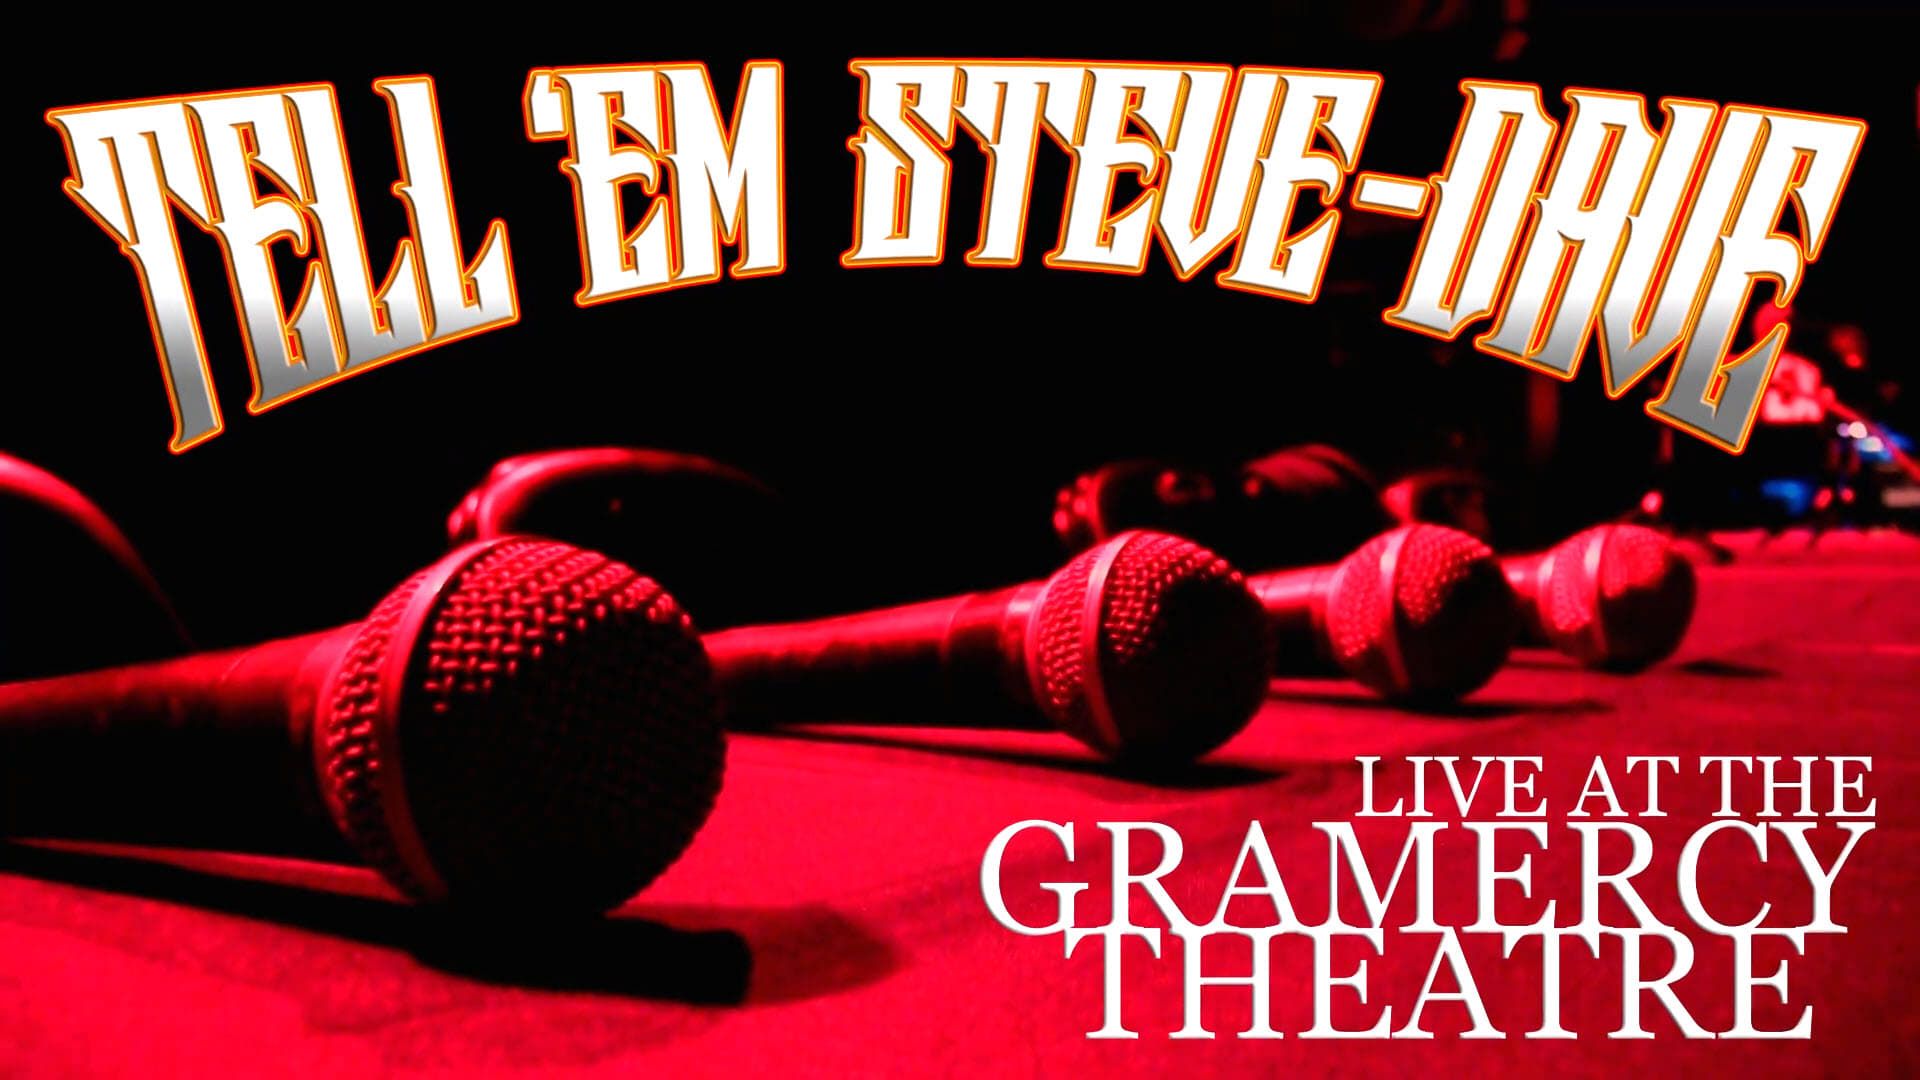 Tell 'Em Steve-Dave: Live at the Gramercy Theatre background